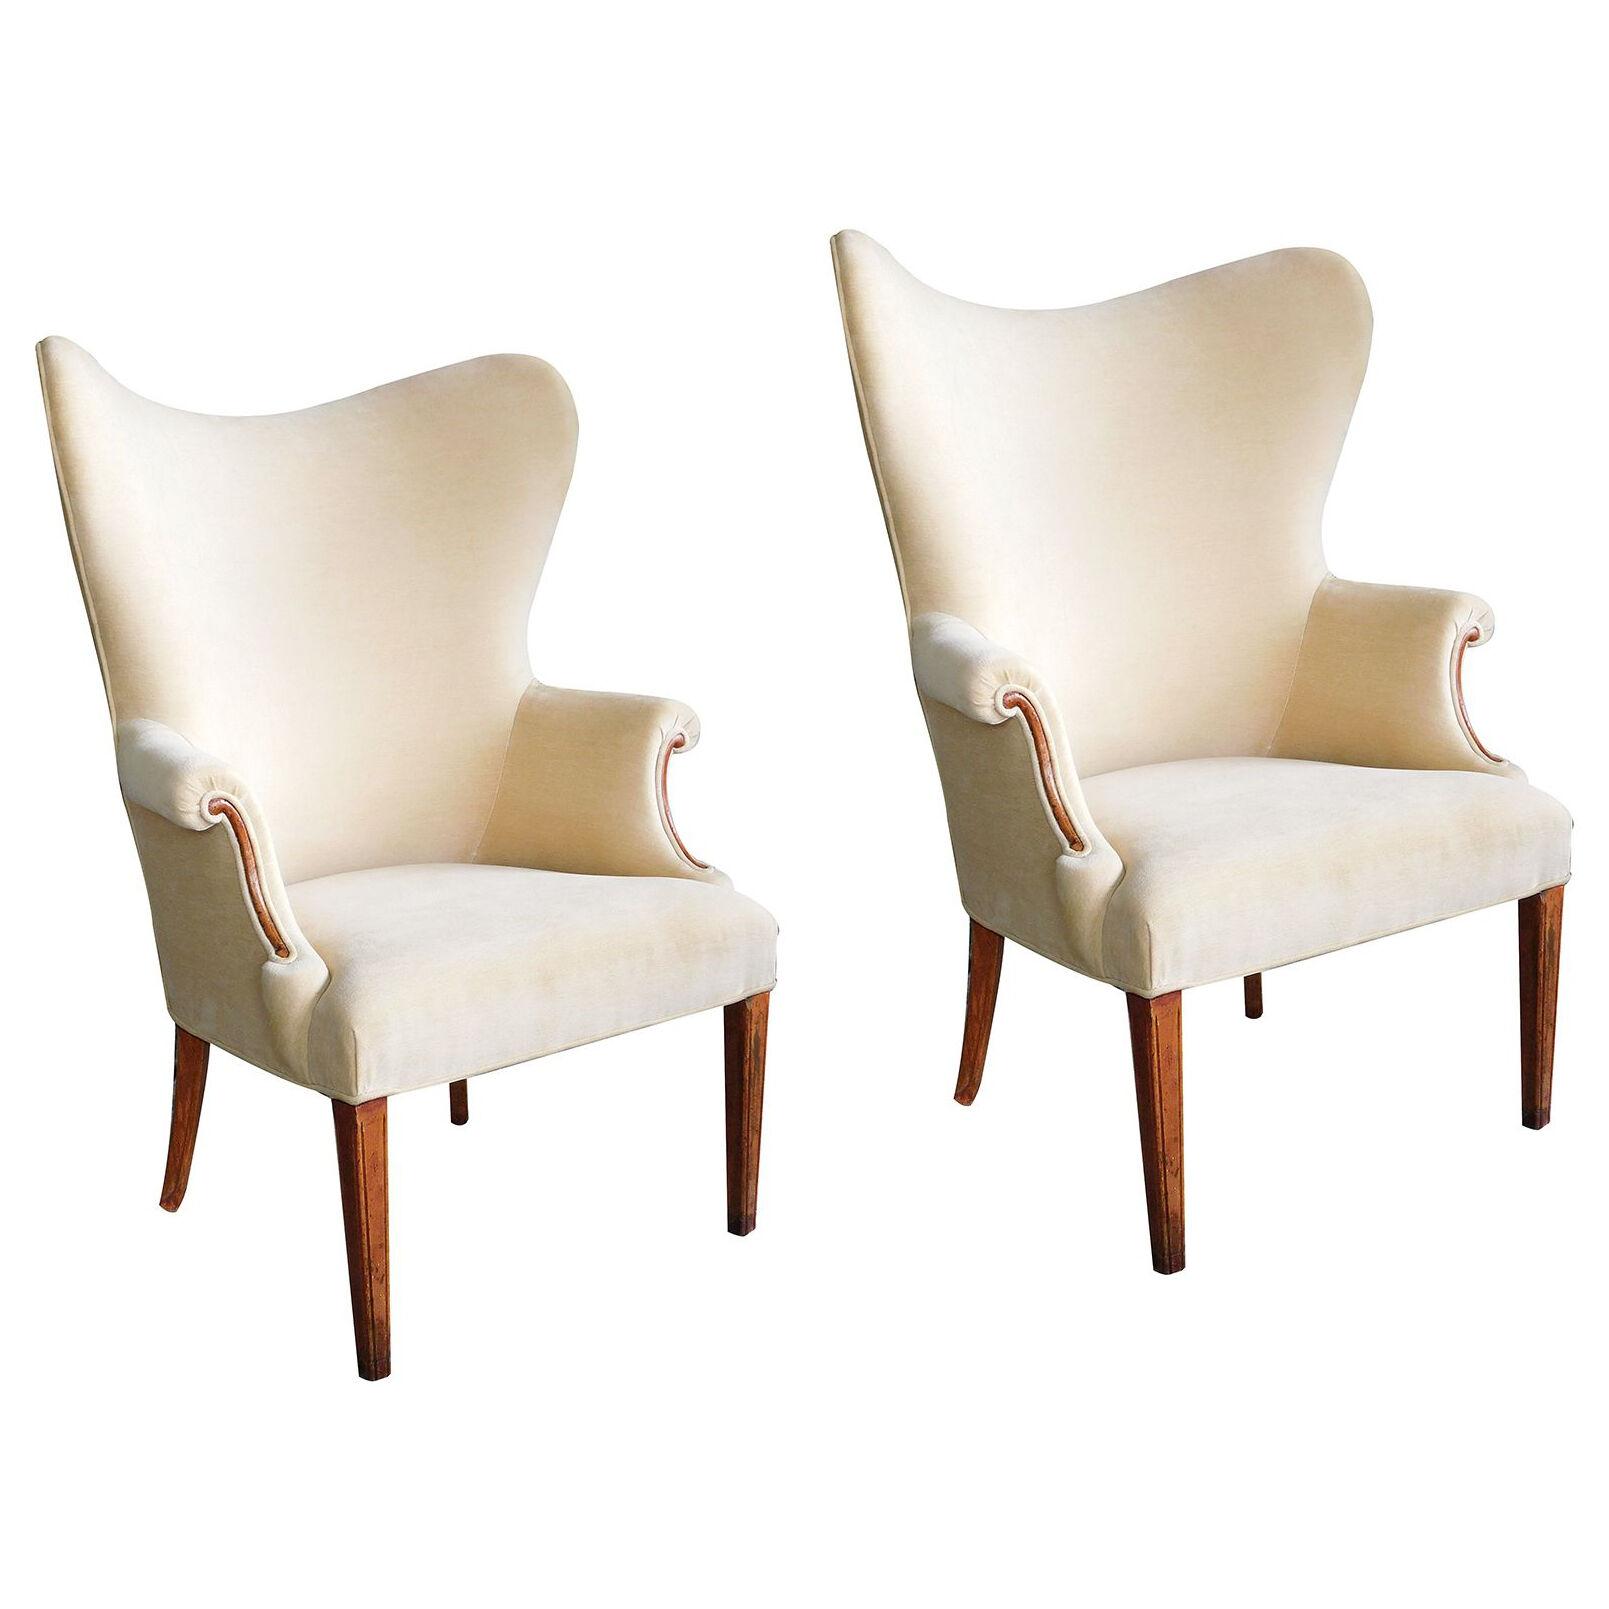 Handsome pair of American 1940's butterfly wingback arm chairs